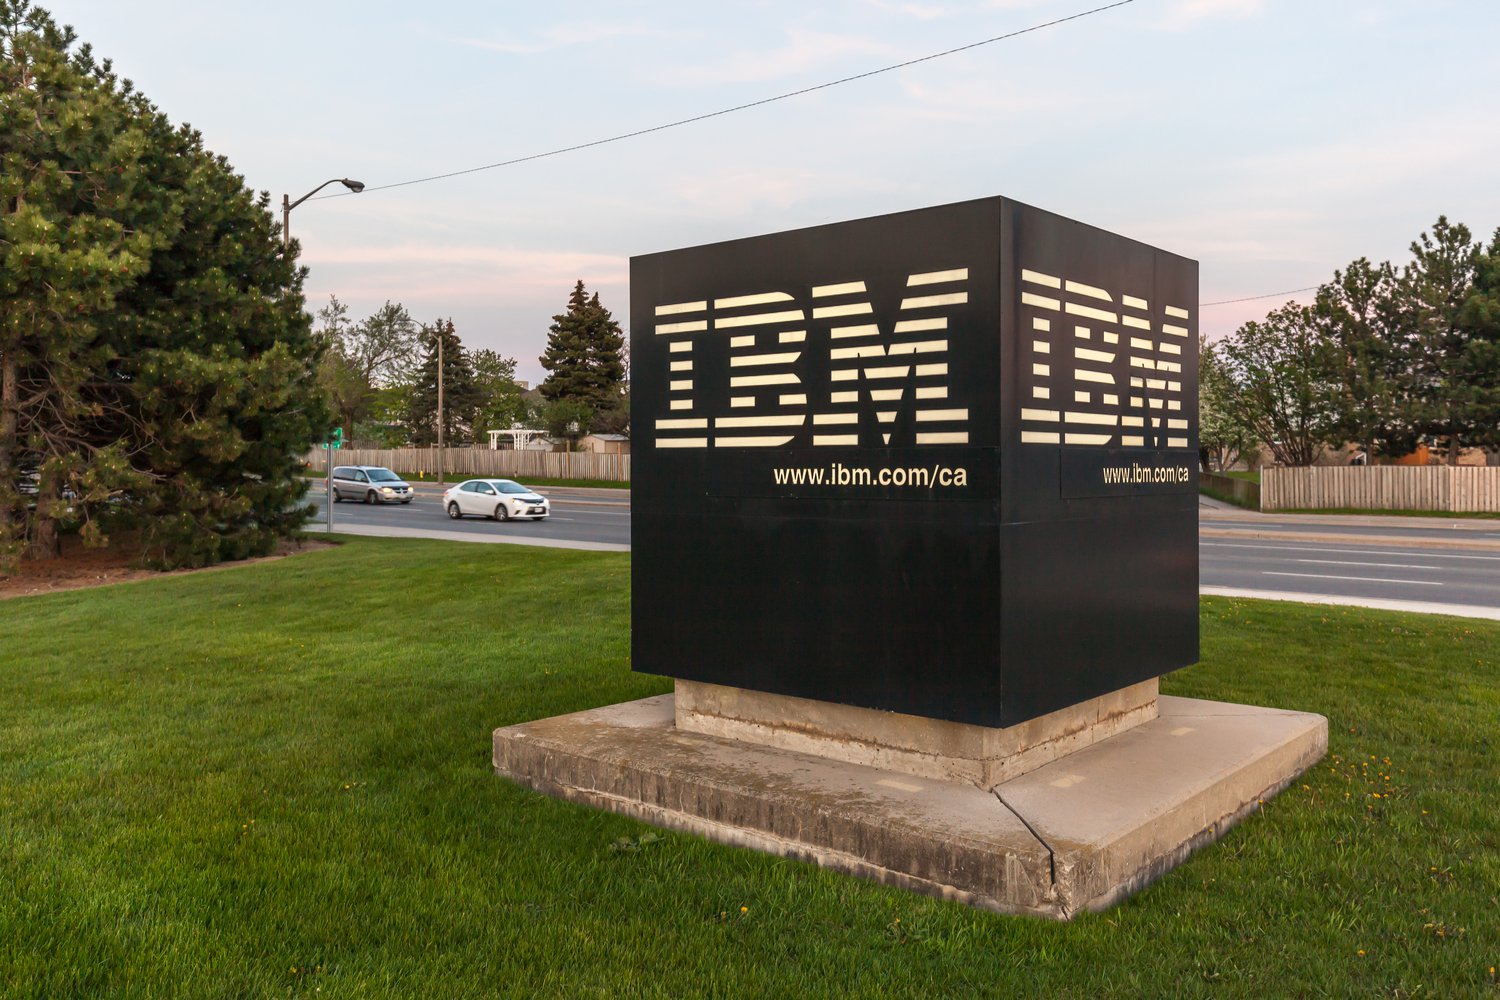 IBM Wins Patent For Blockchain-Based Network Security System